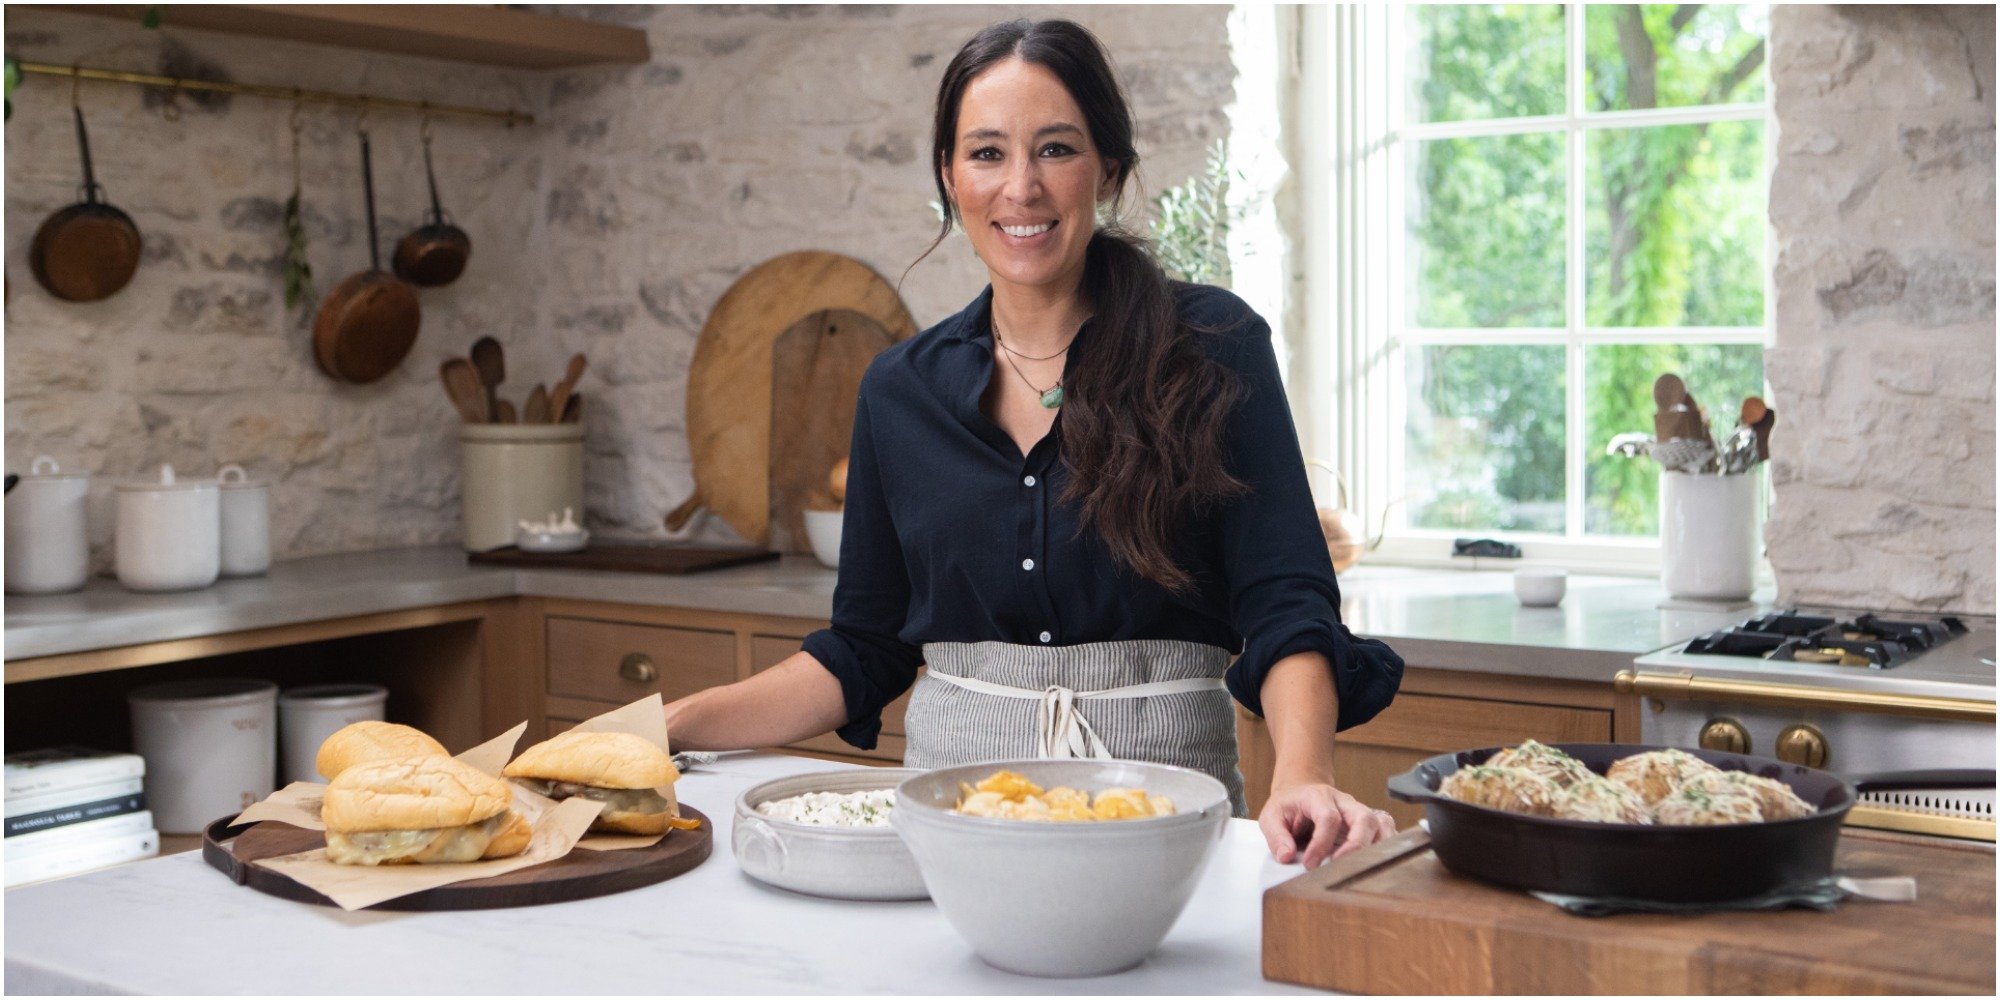 Joanna Gaines on the set of her cooking show In the Kitchen with Joanna Gaines.